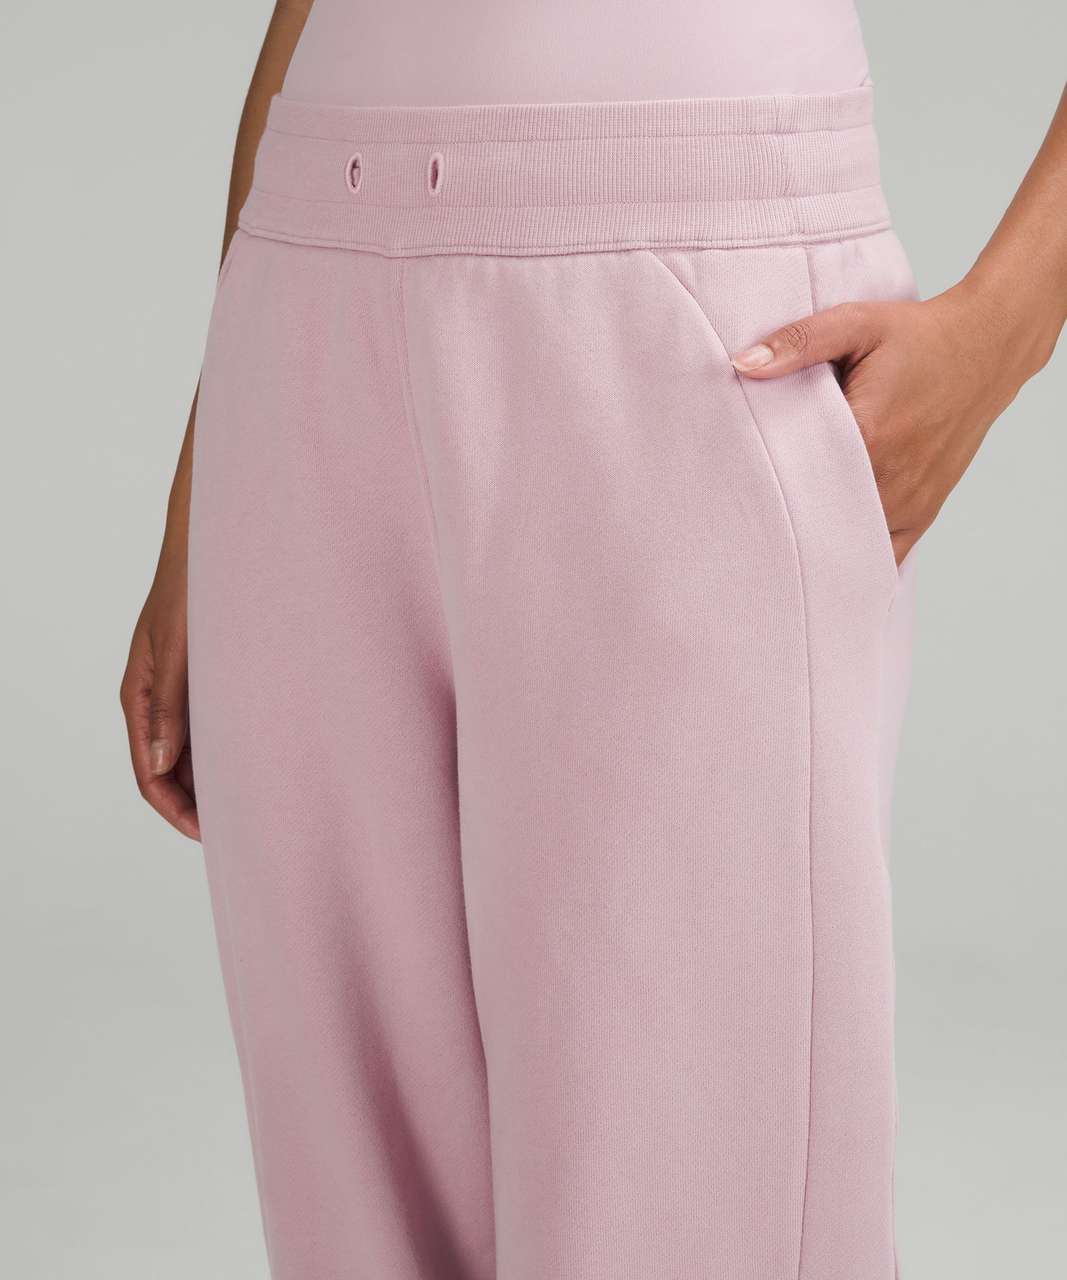 Lululemon Scuba High-Rise Relaxed Jogger - Pink Peony